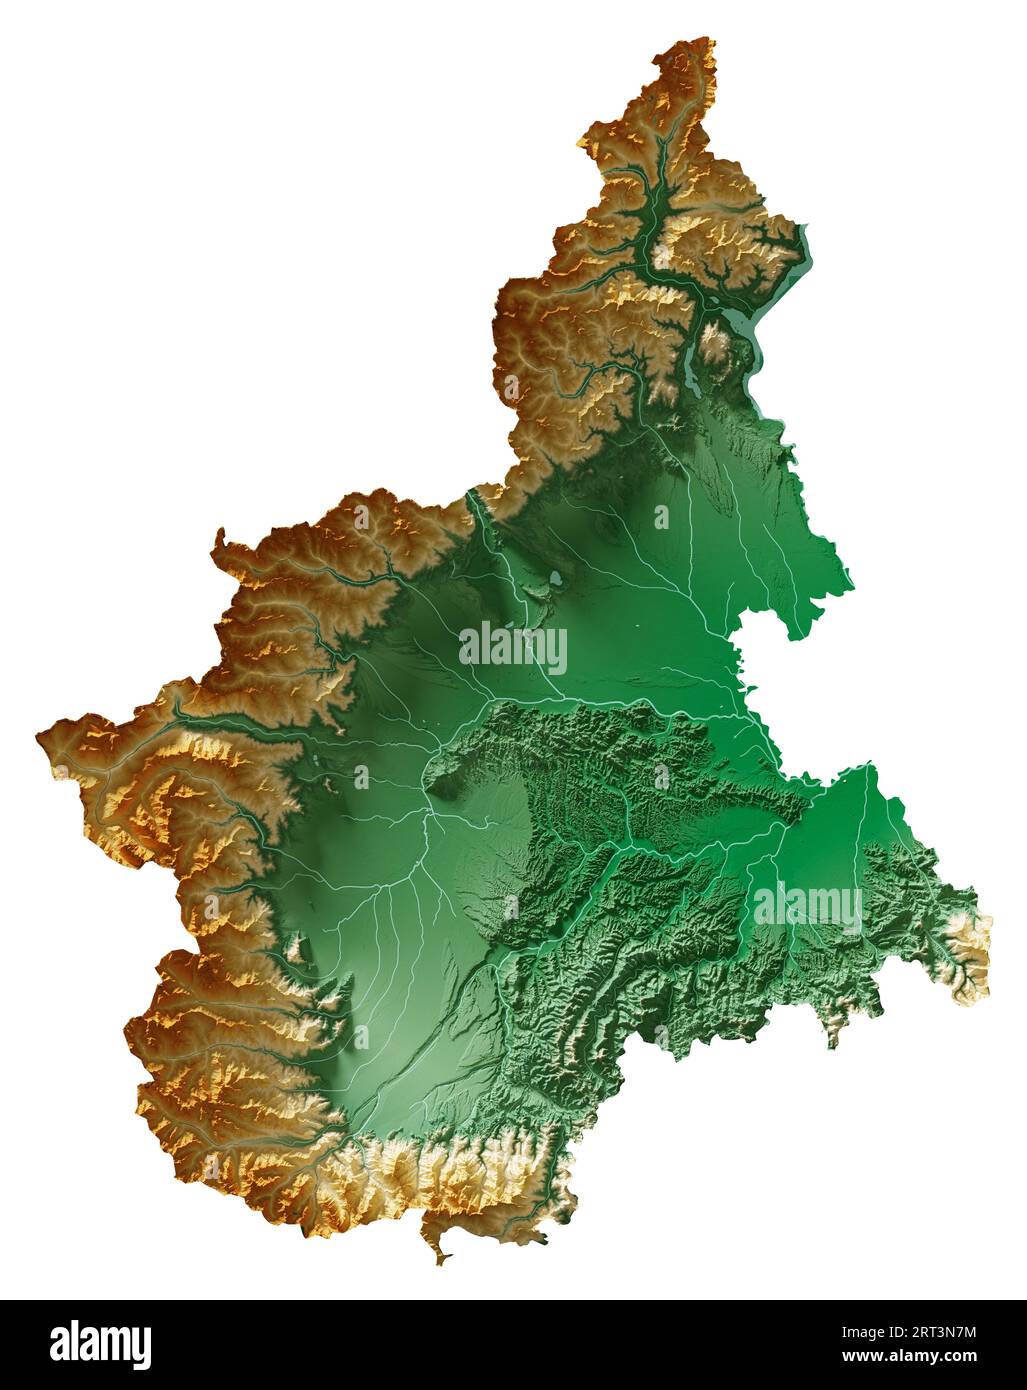 Piemonte (Piedmont). A region of Italy. Detailed 3D rendering of a ...